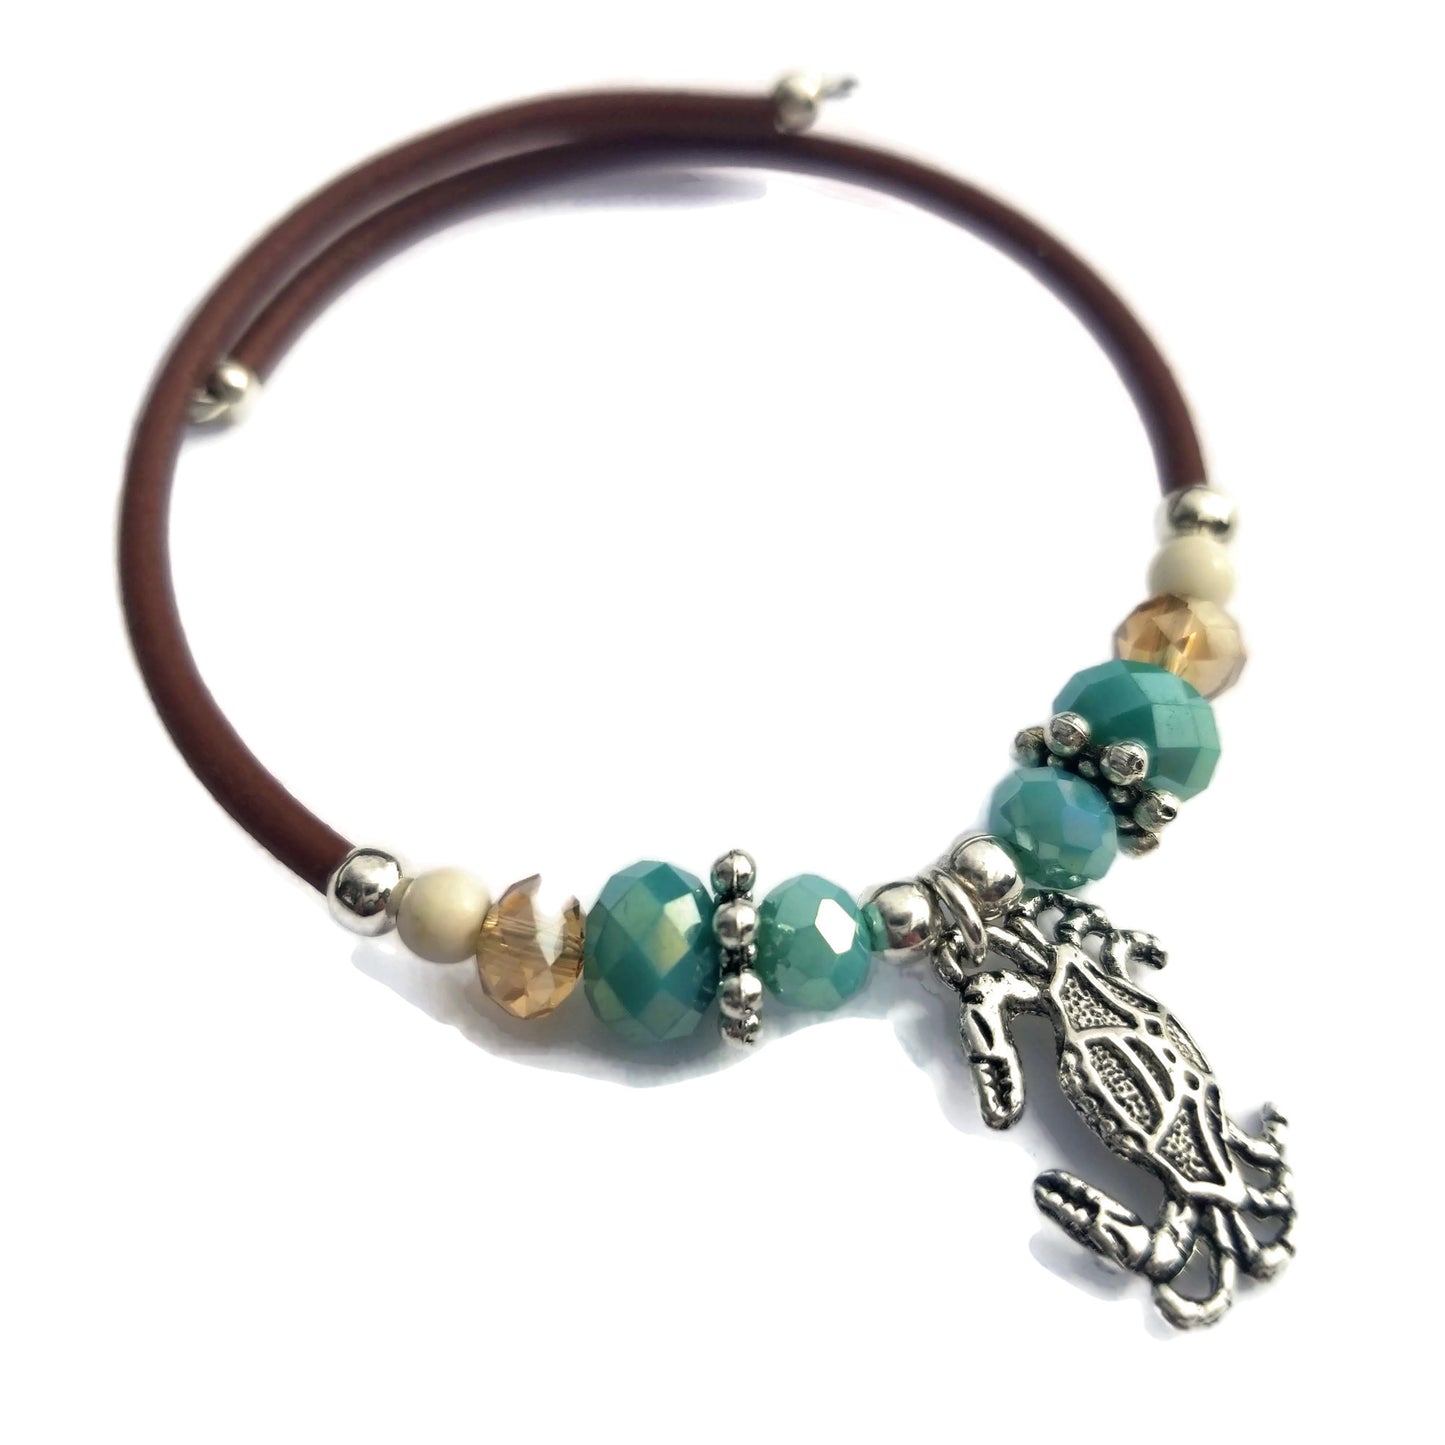 Wrap Bracelet - crab pewter charm with mix aqua and sandy colored beads